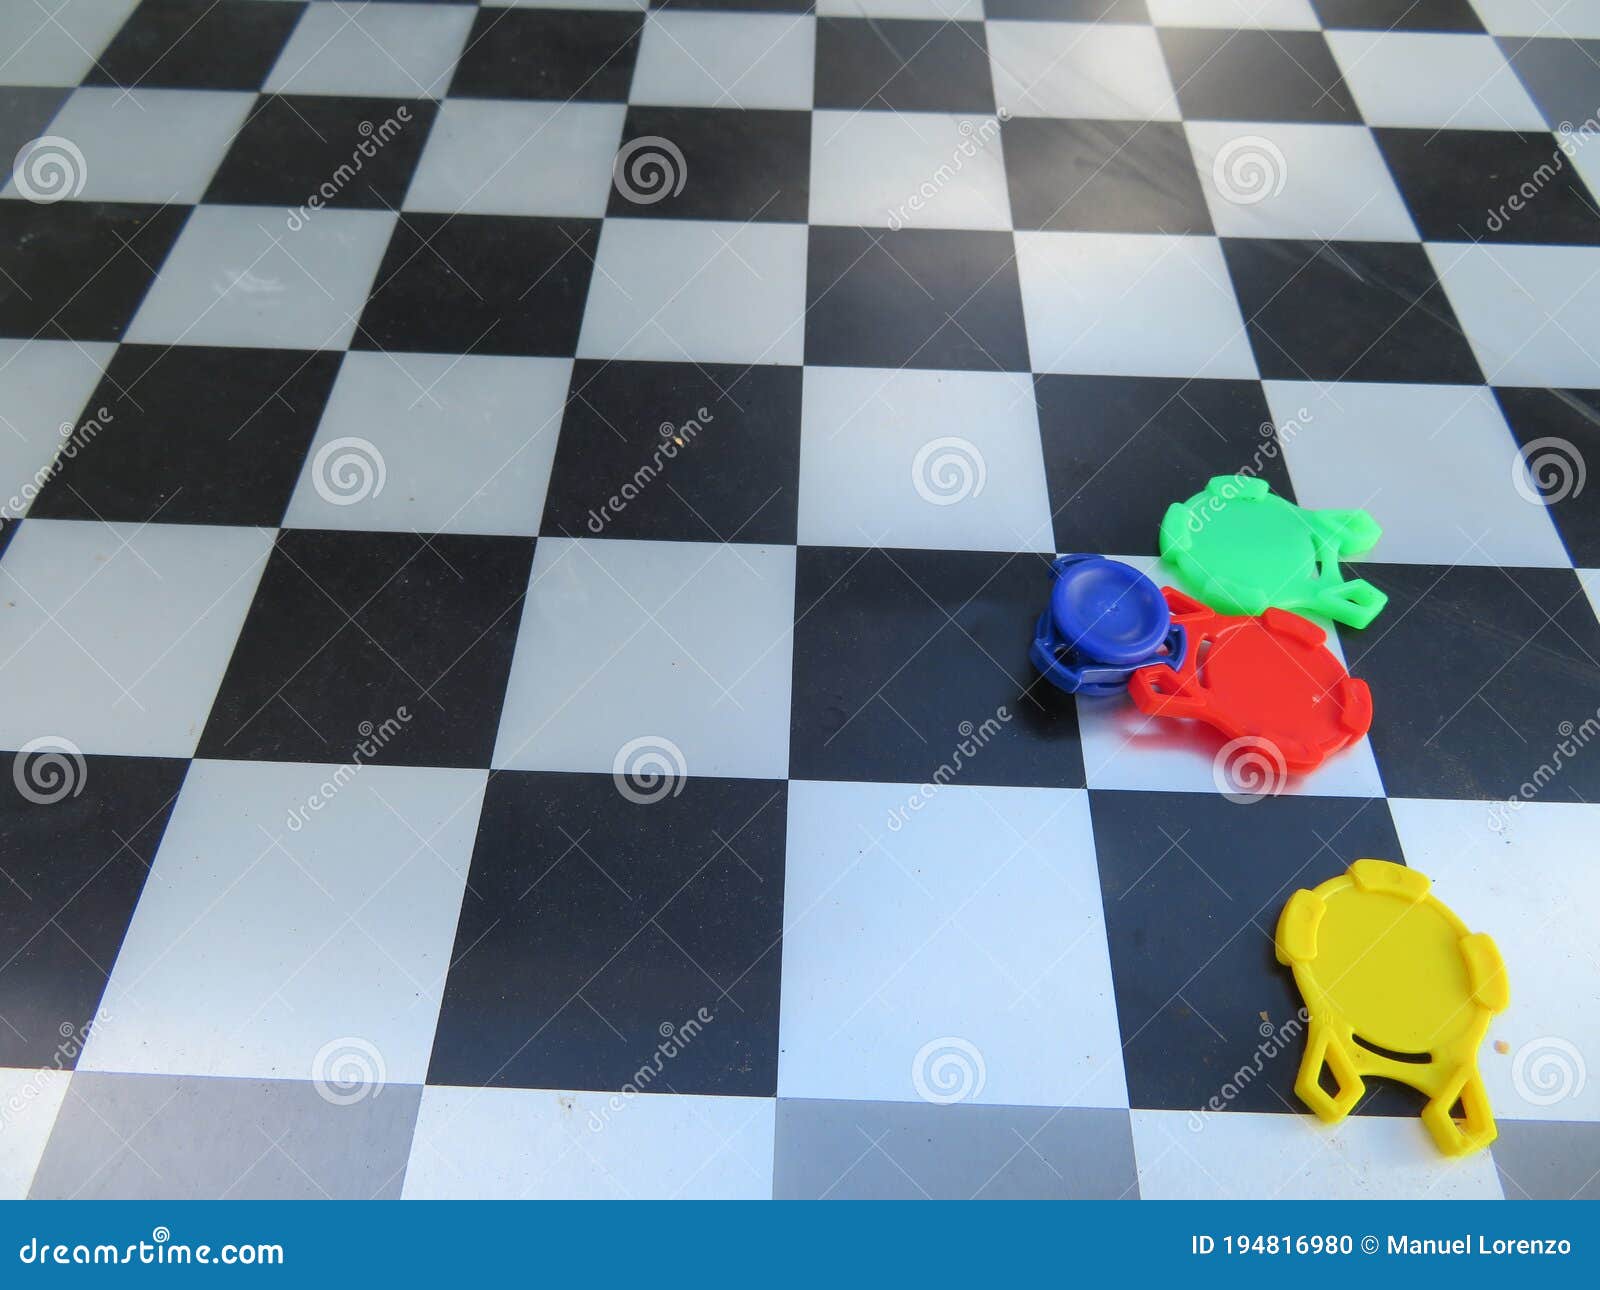 chess game board used for other entertainment with different tiles